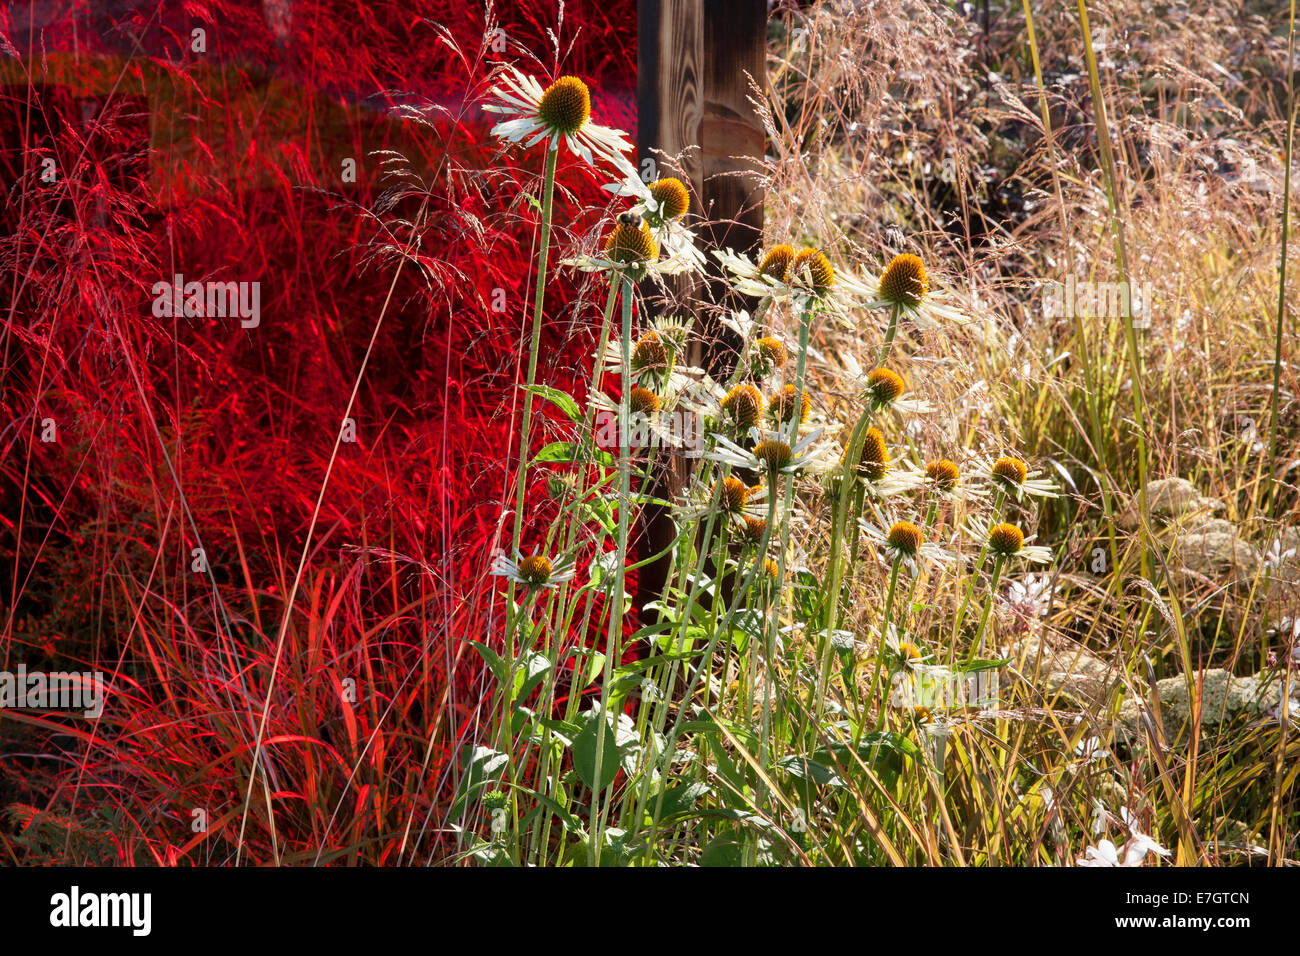 Small gardens garden border with a red perspex screen planting of Echinacea purpurea White Swan growing amongst ornamental grass grasses summer UK Stock Photo